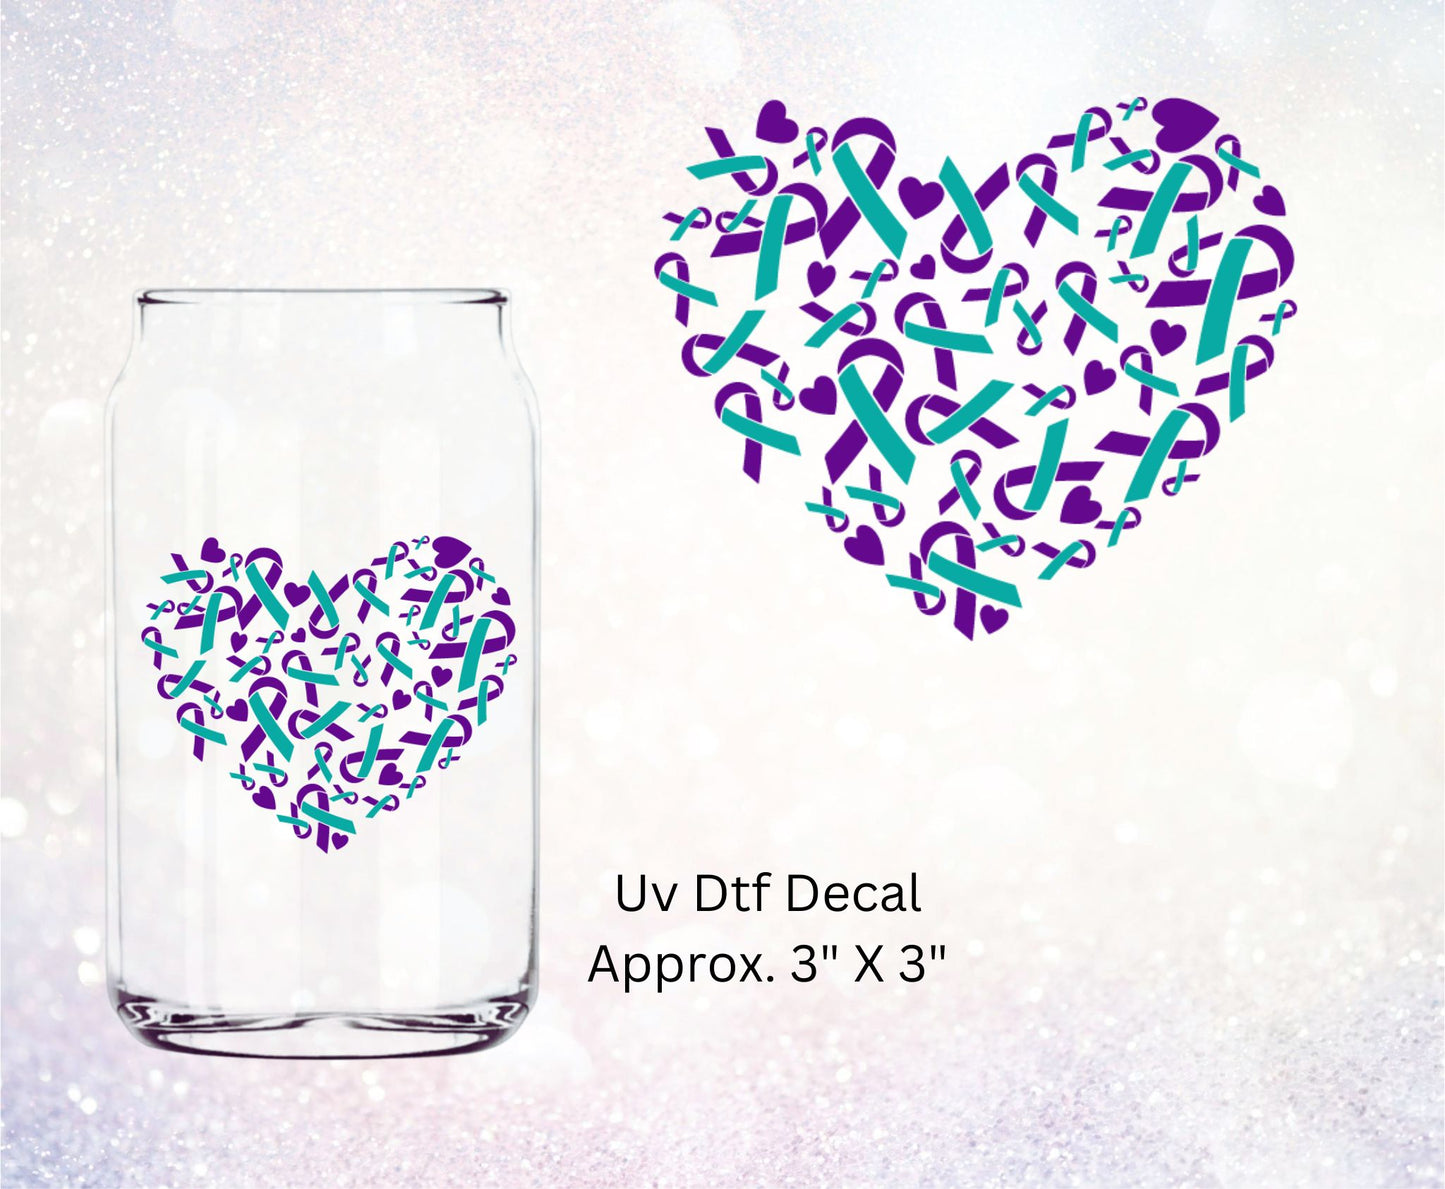 Uv Dtf Decal Suicide Prevention Ribbons Heart